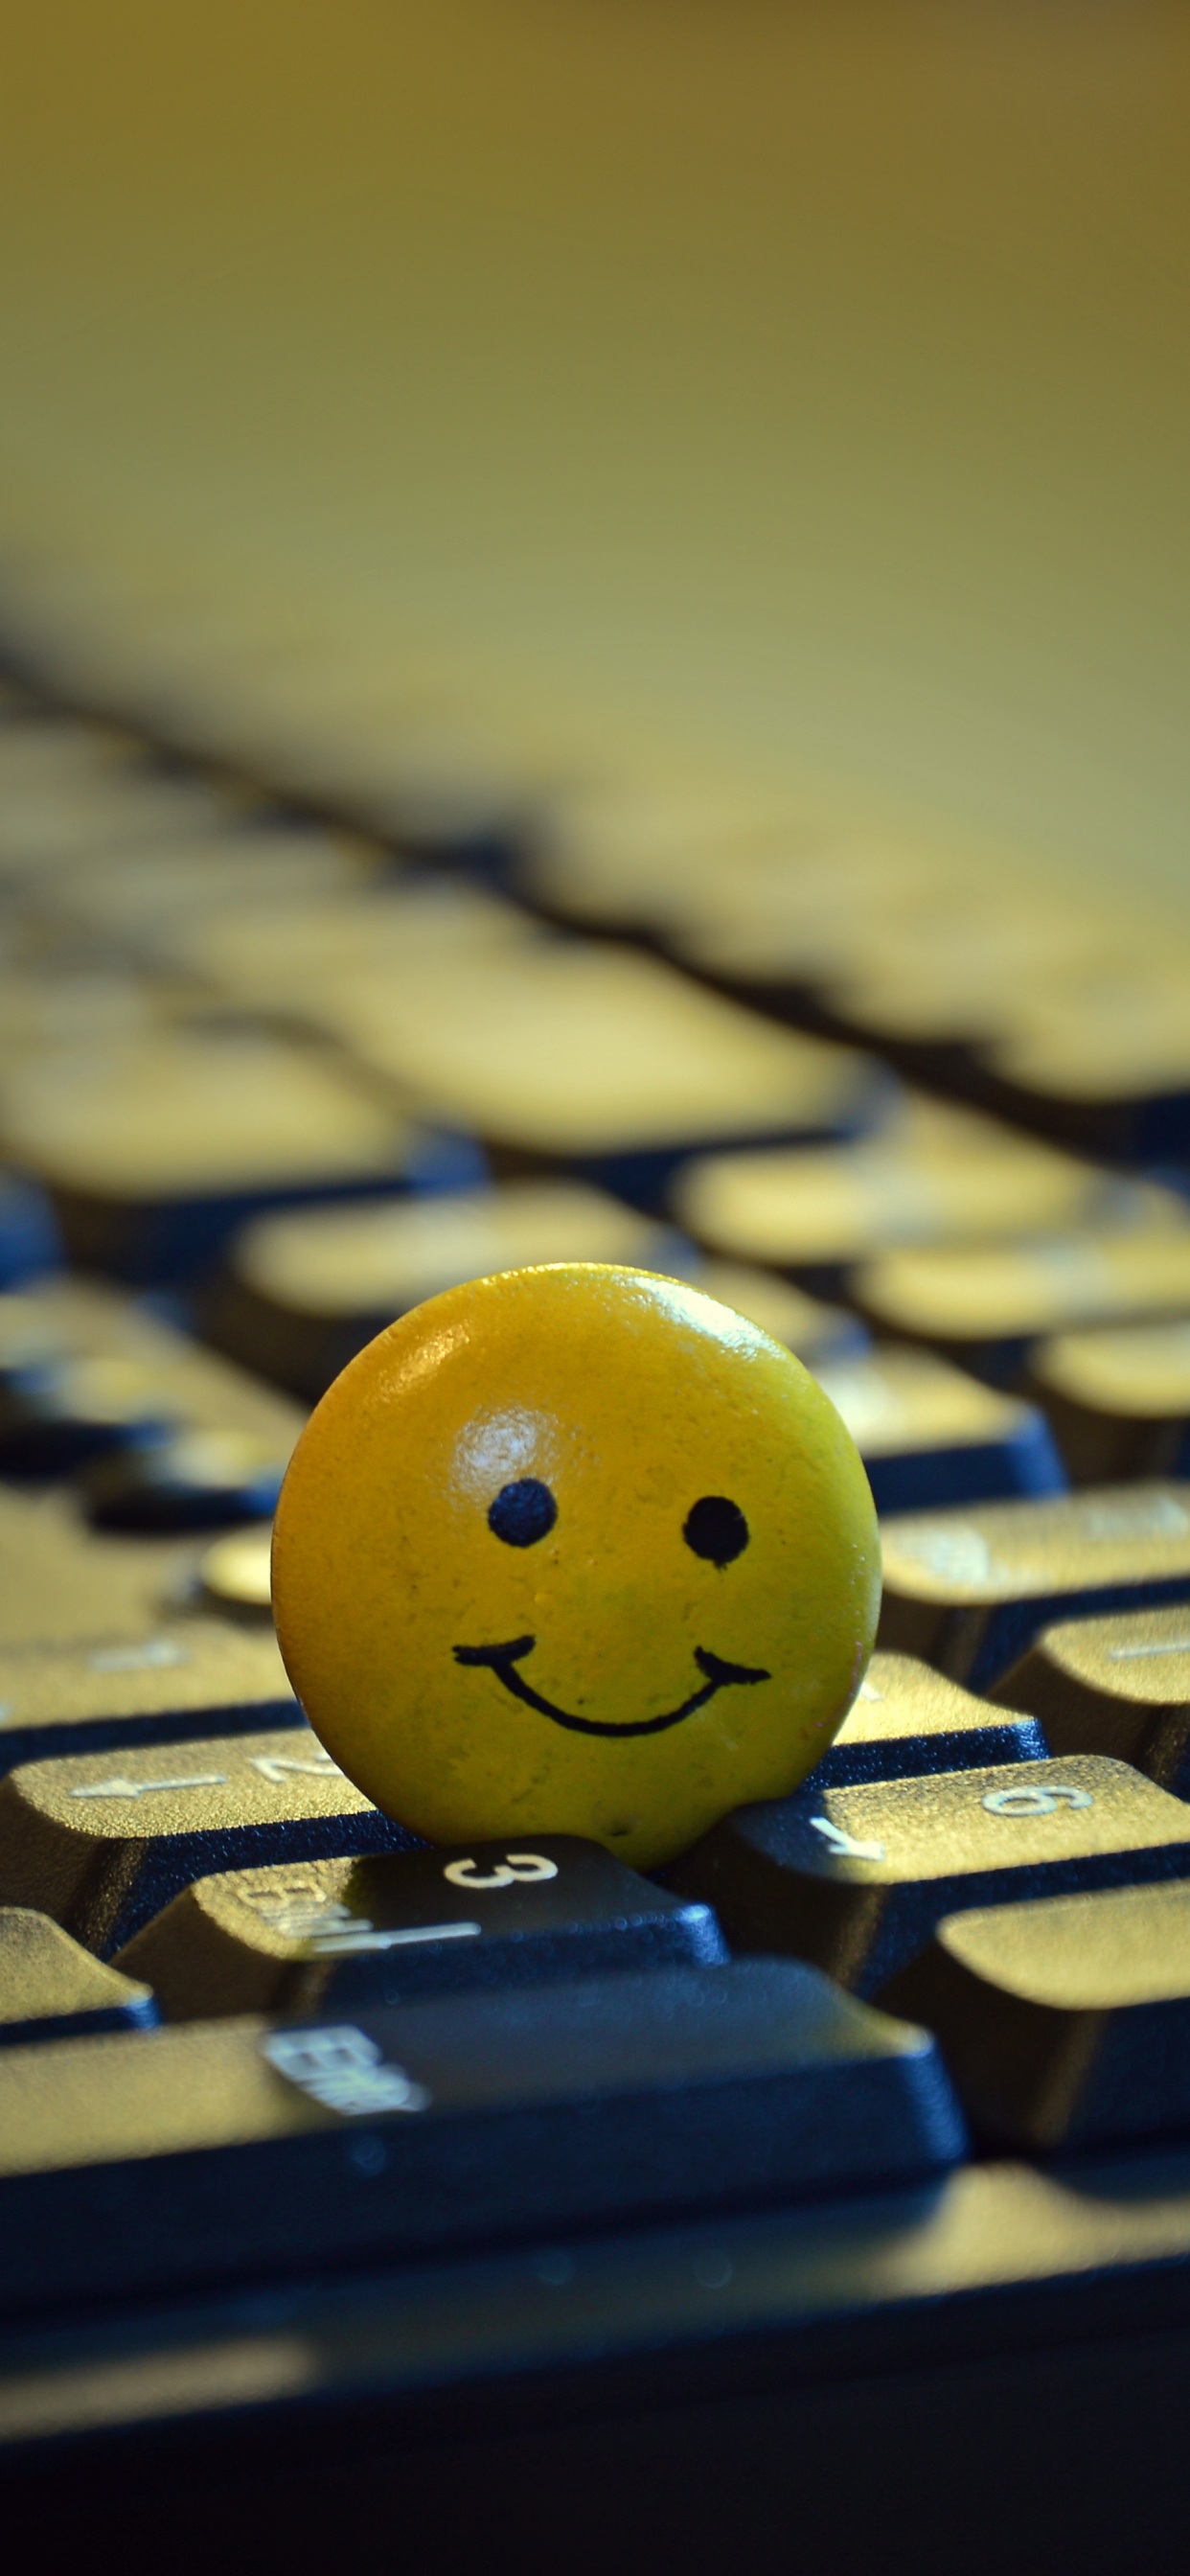 Yellow Smiley Ball on Black Computer Keyboard. Wallpaper in 1242x2688 Resolution